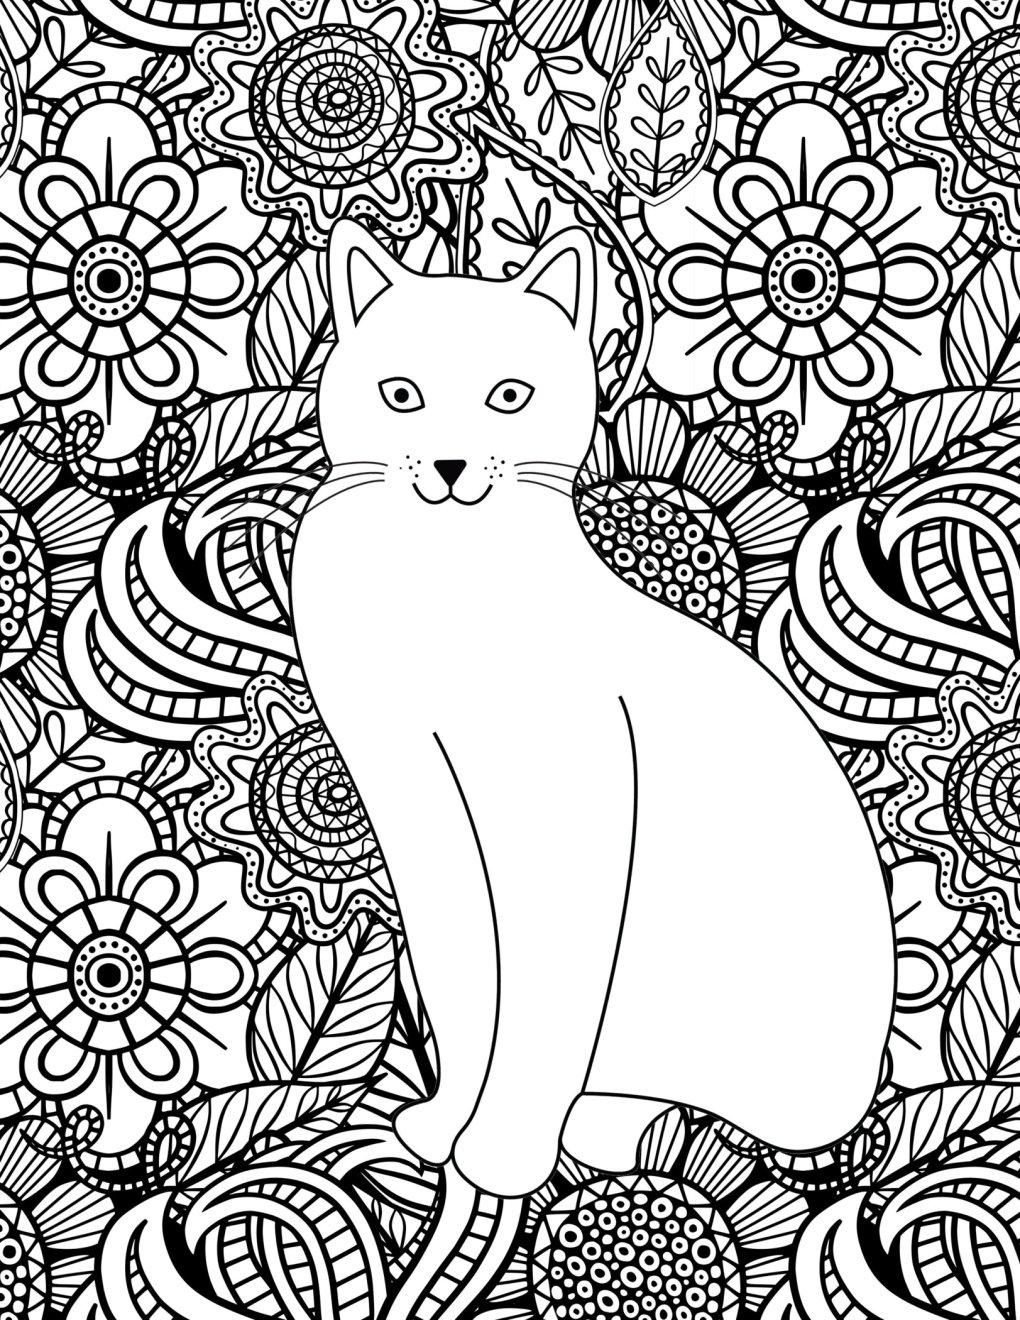 Printable Cat Themed Coloring Picture for Fun and Relaxation